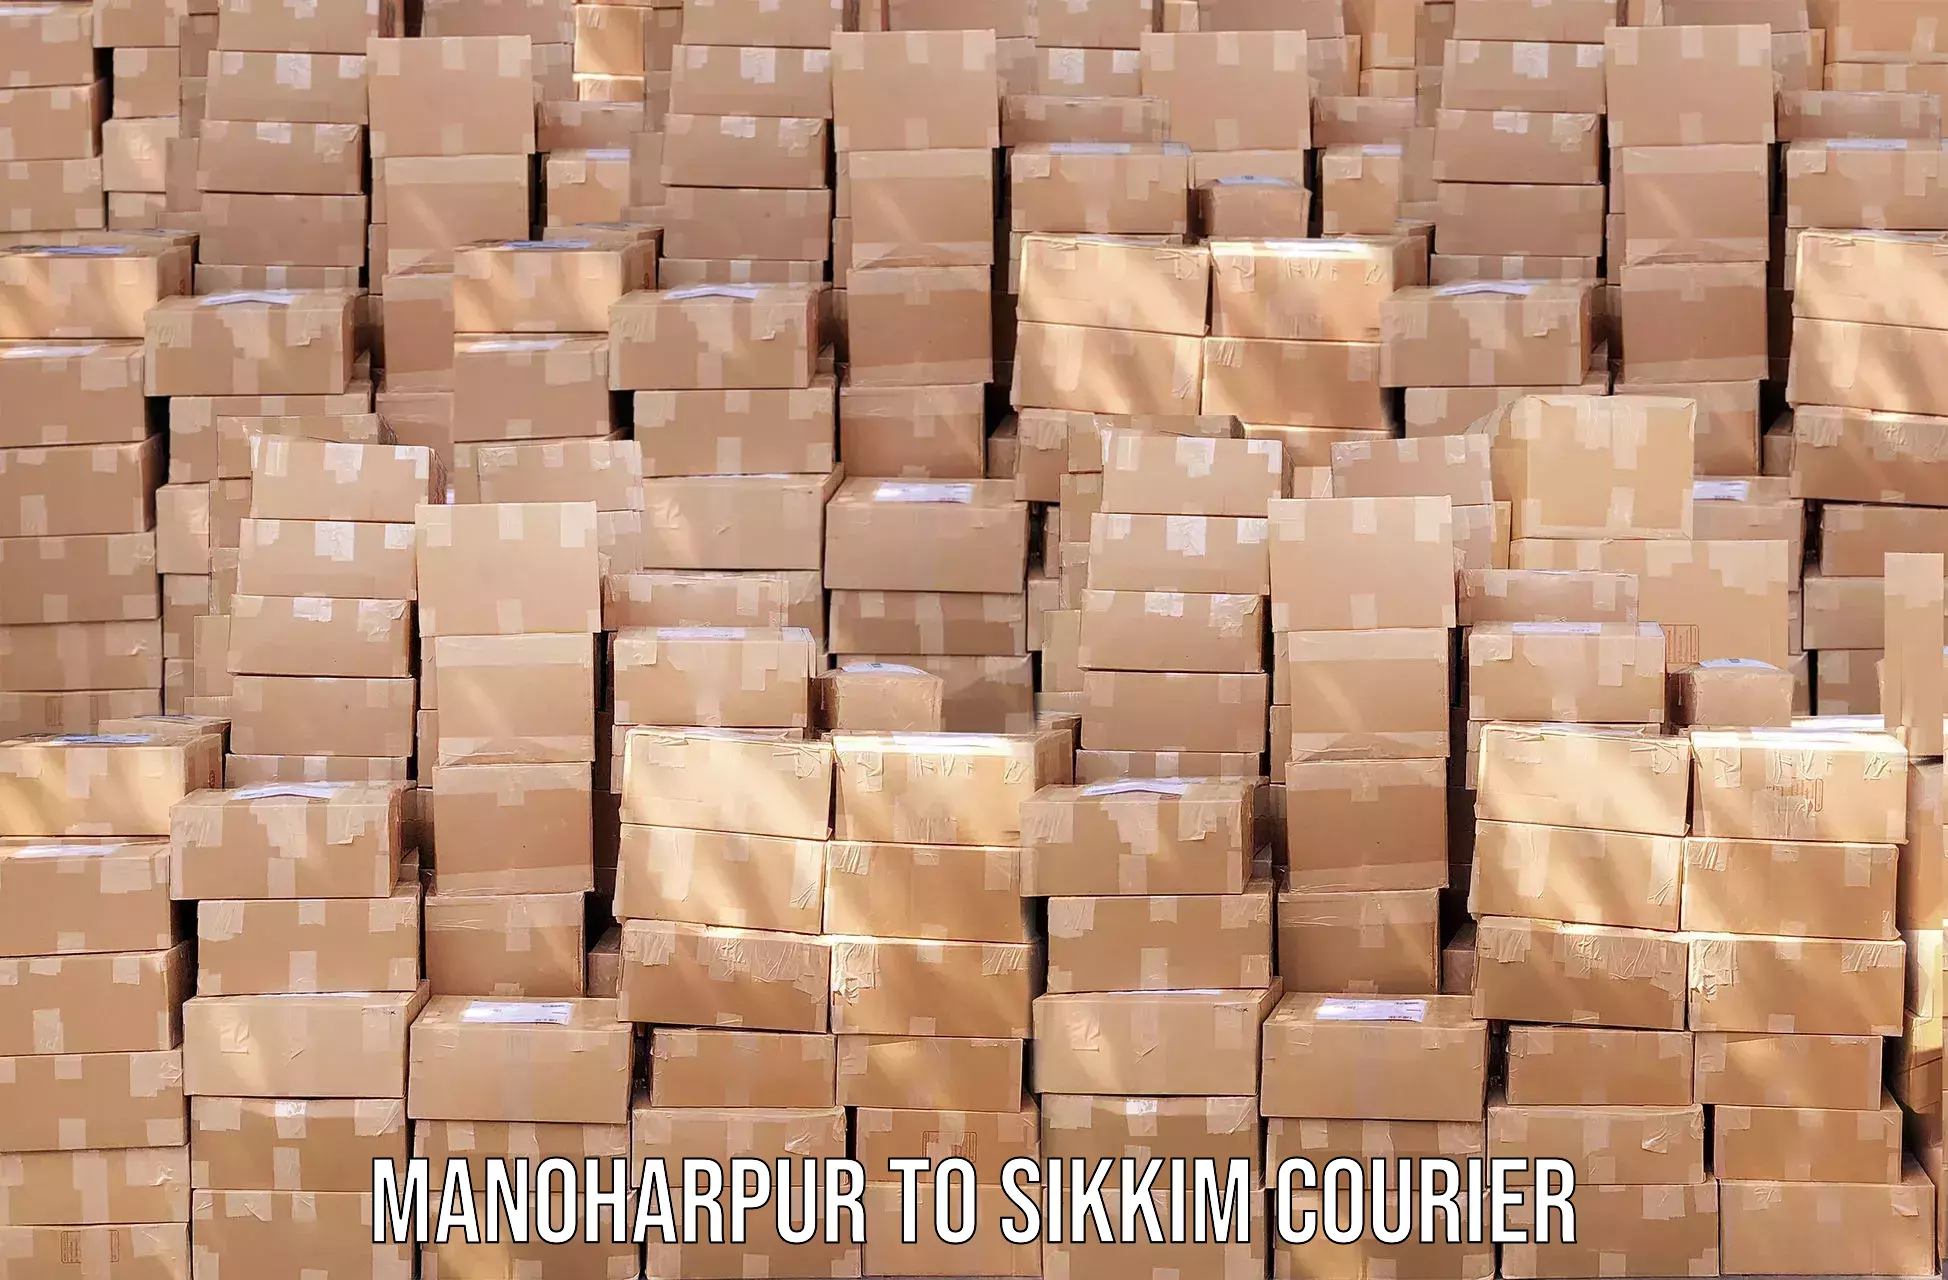 Courier service comparison Manoharpur to East Sikkim